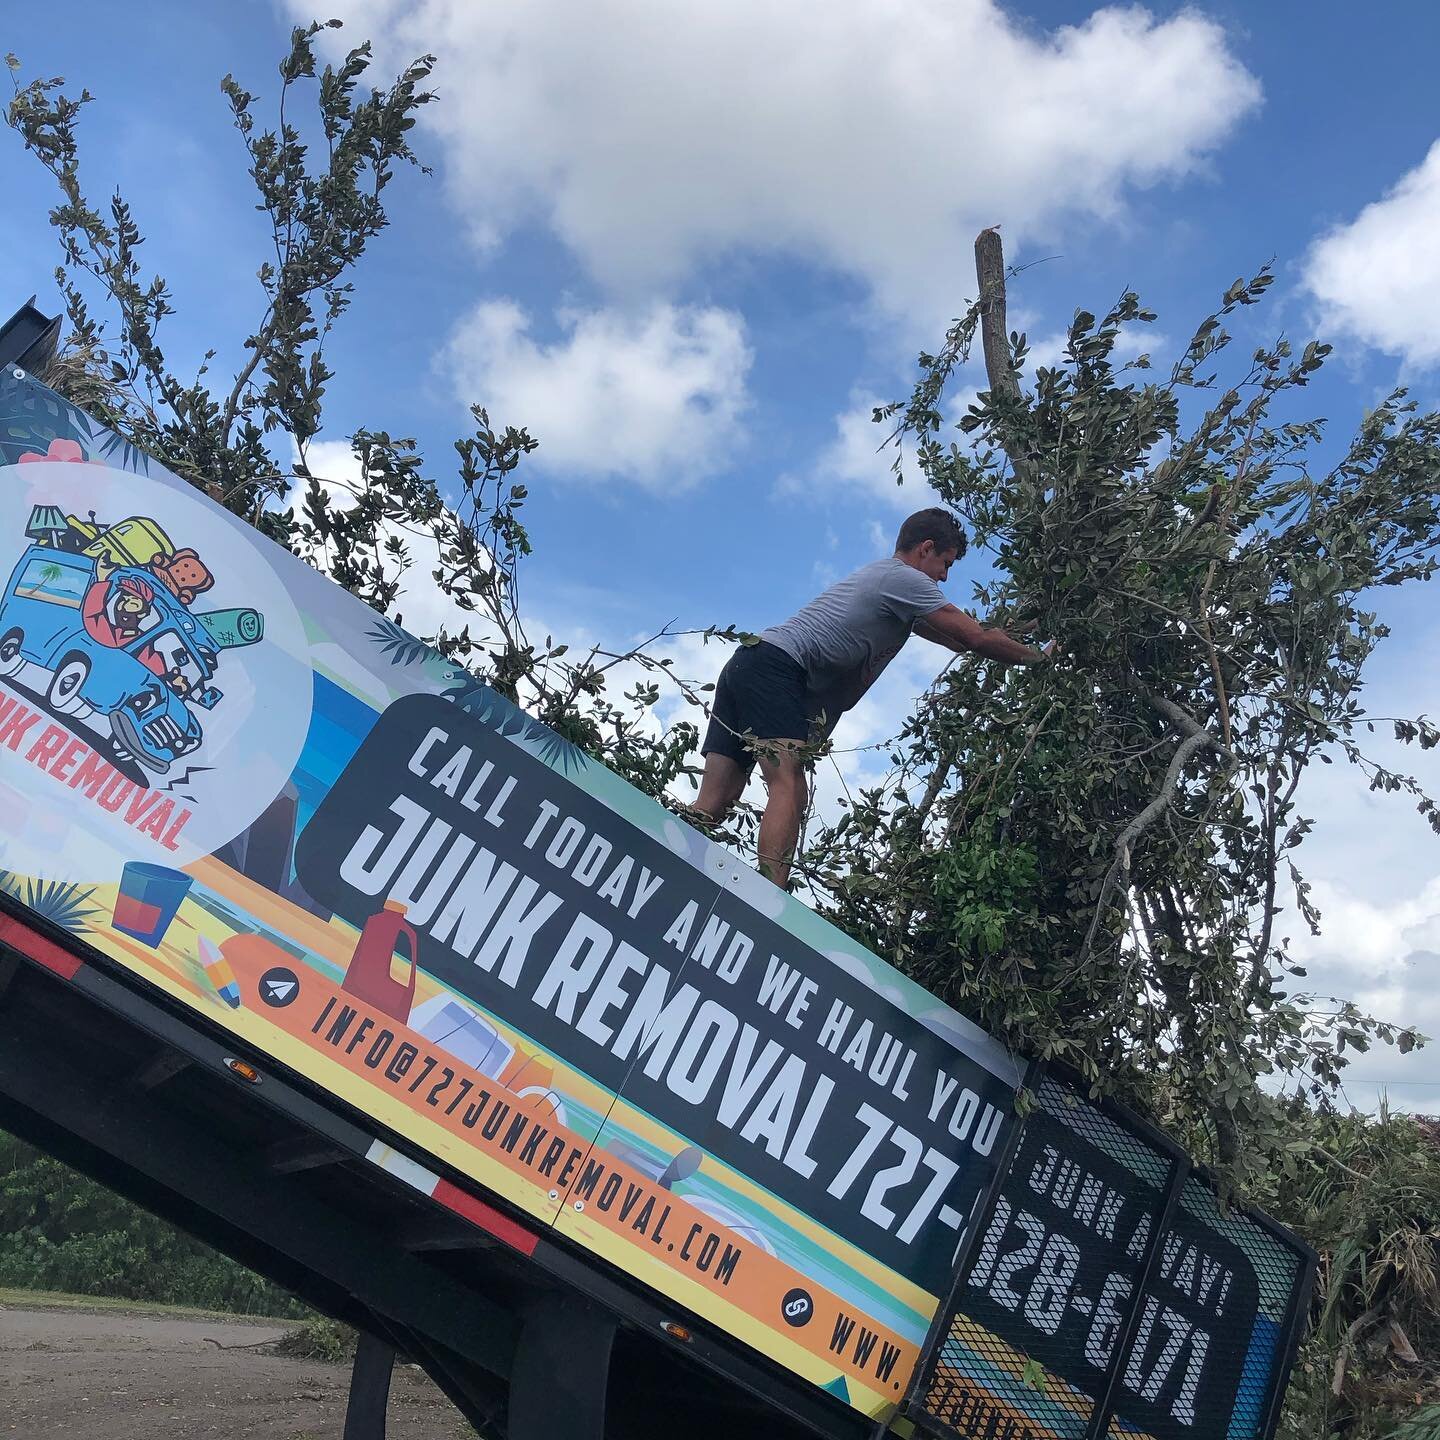 A branch a day will keep the bugs away. 🚂 🗑
&bull;
📲 Call For Instant Quote!
(727) 828-6171
&bull;
Call today for a FREE quote to haul your junk. Services starting as low as $99 including dump fees.
&bull;
What&rsquo;s covered? Construction debris